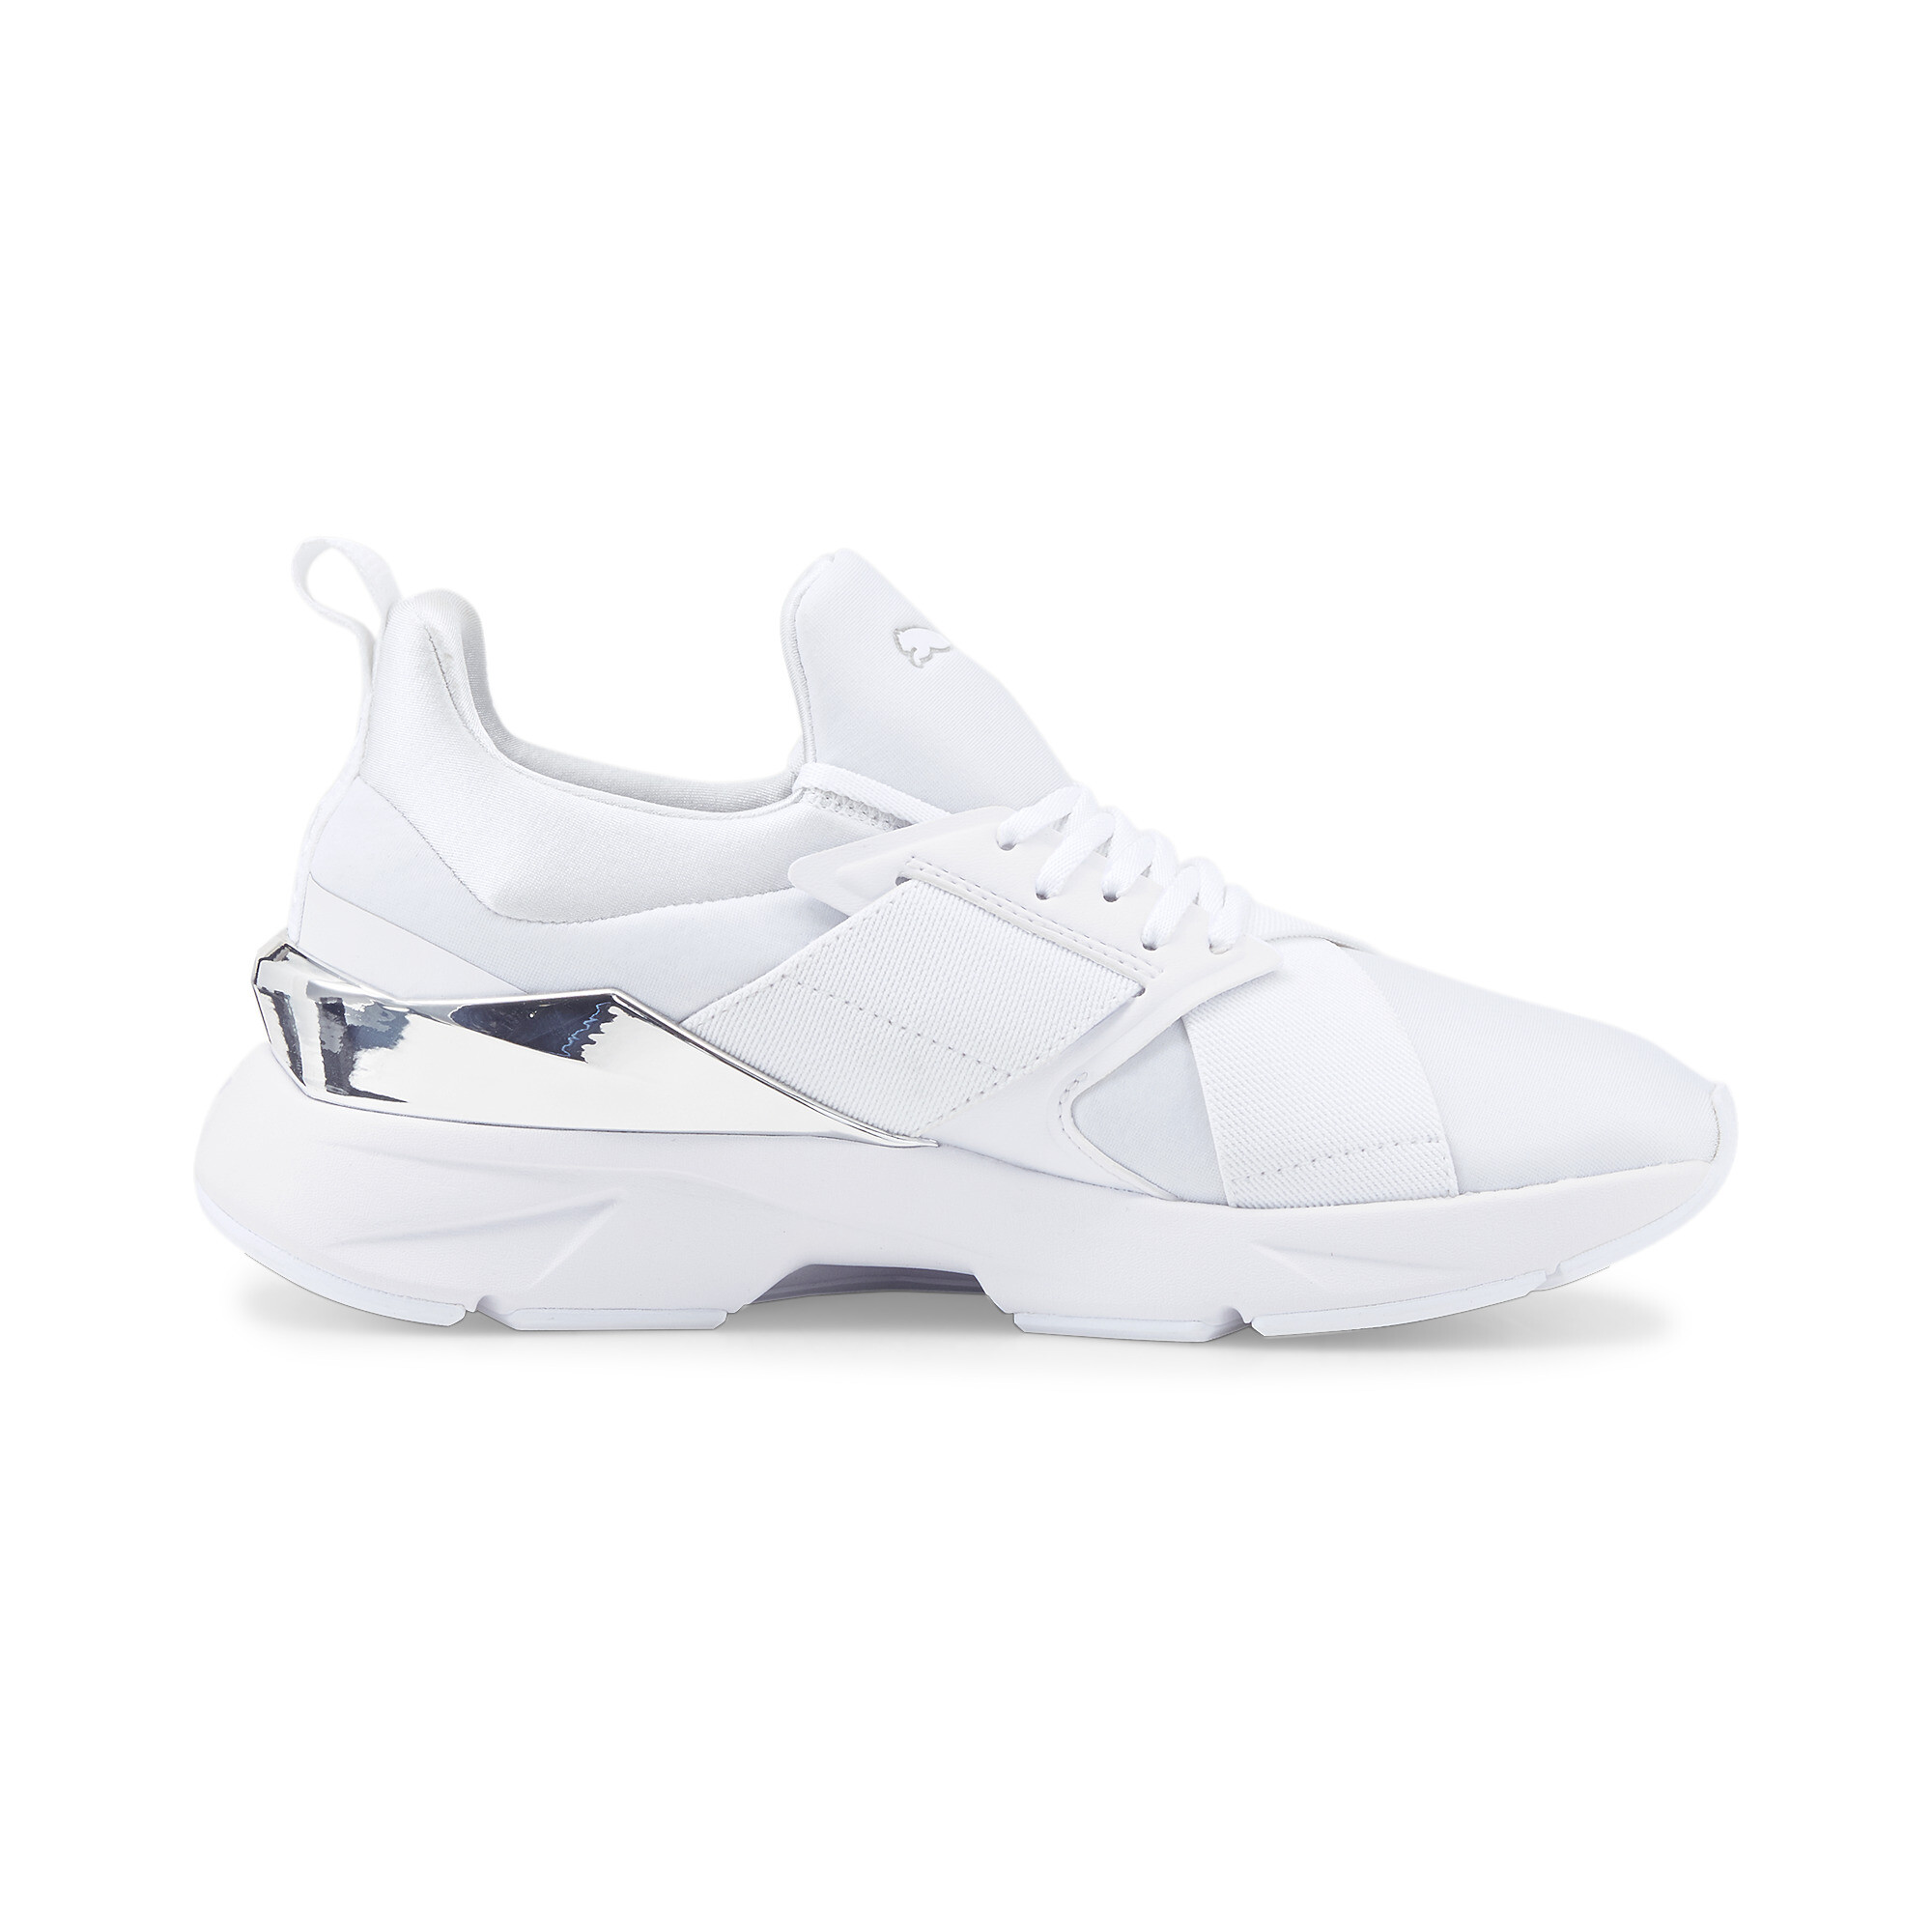 Women's PUMA Muse X5 Metal Trainers Shoes In White/Silver, Size EU 35.5